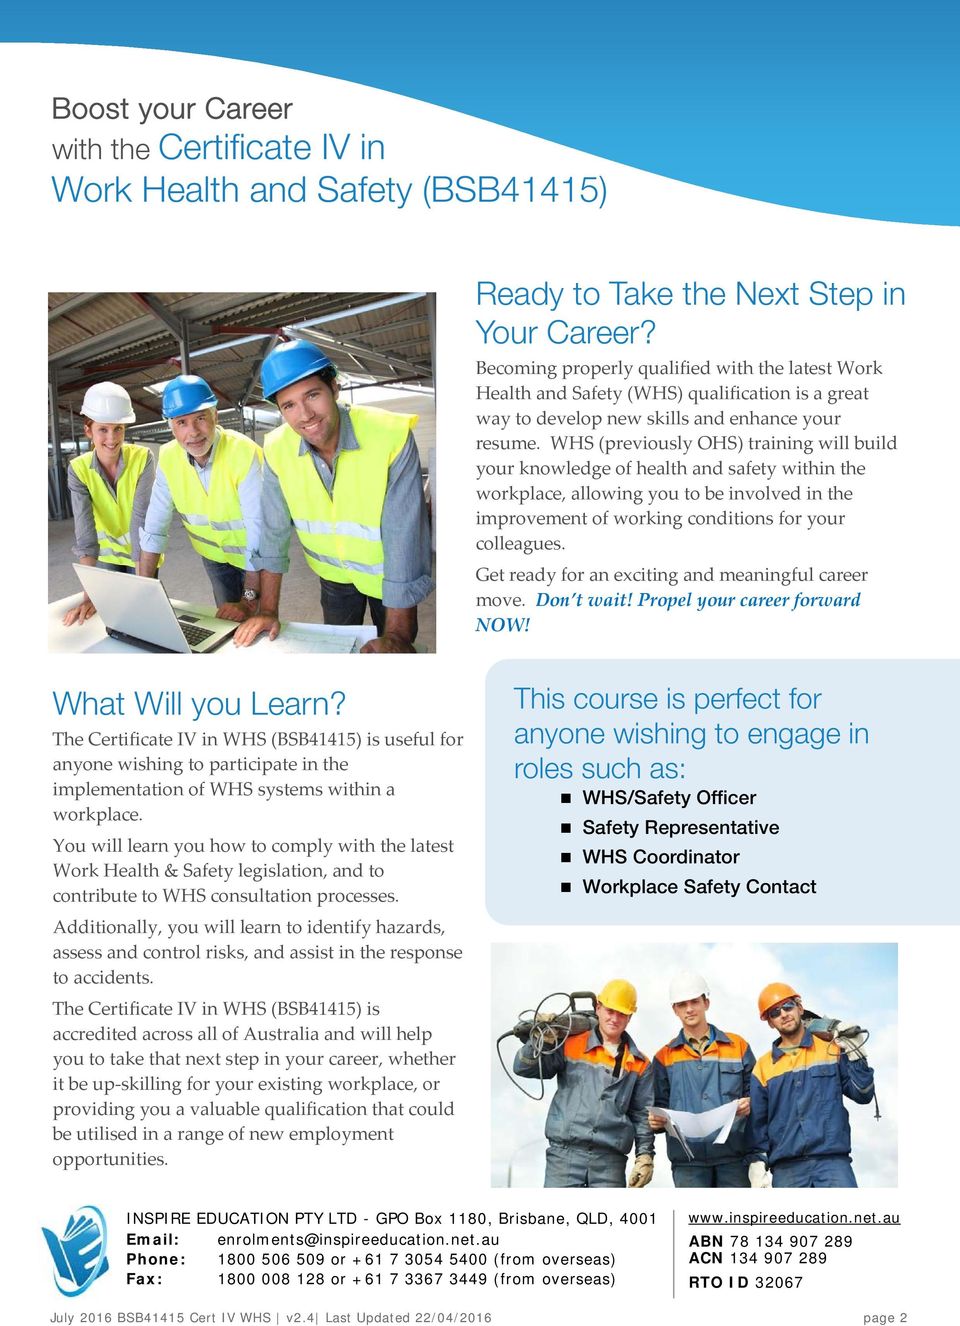 WHS (previously OHS) training will build your knowledge of health and safety within the workplace, allowing you to be involved in the improvement of working conditions for your colleagues.